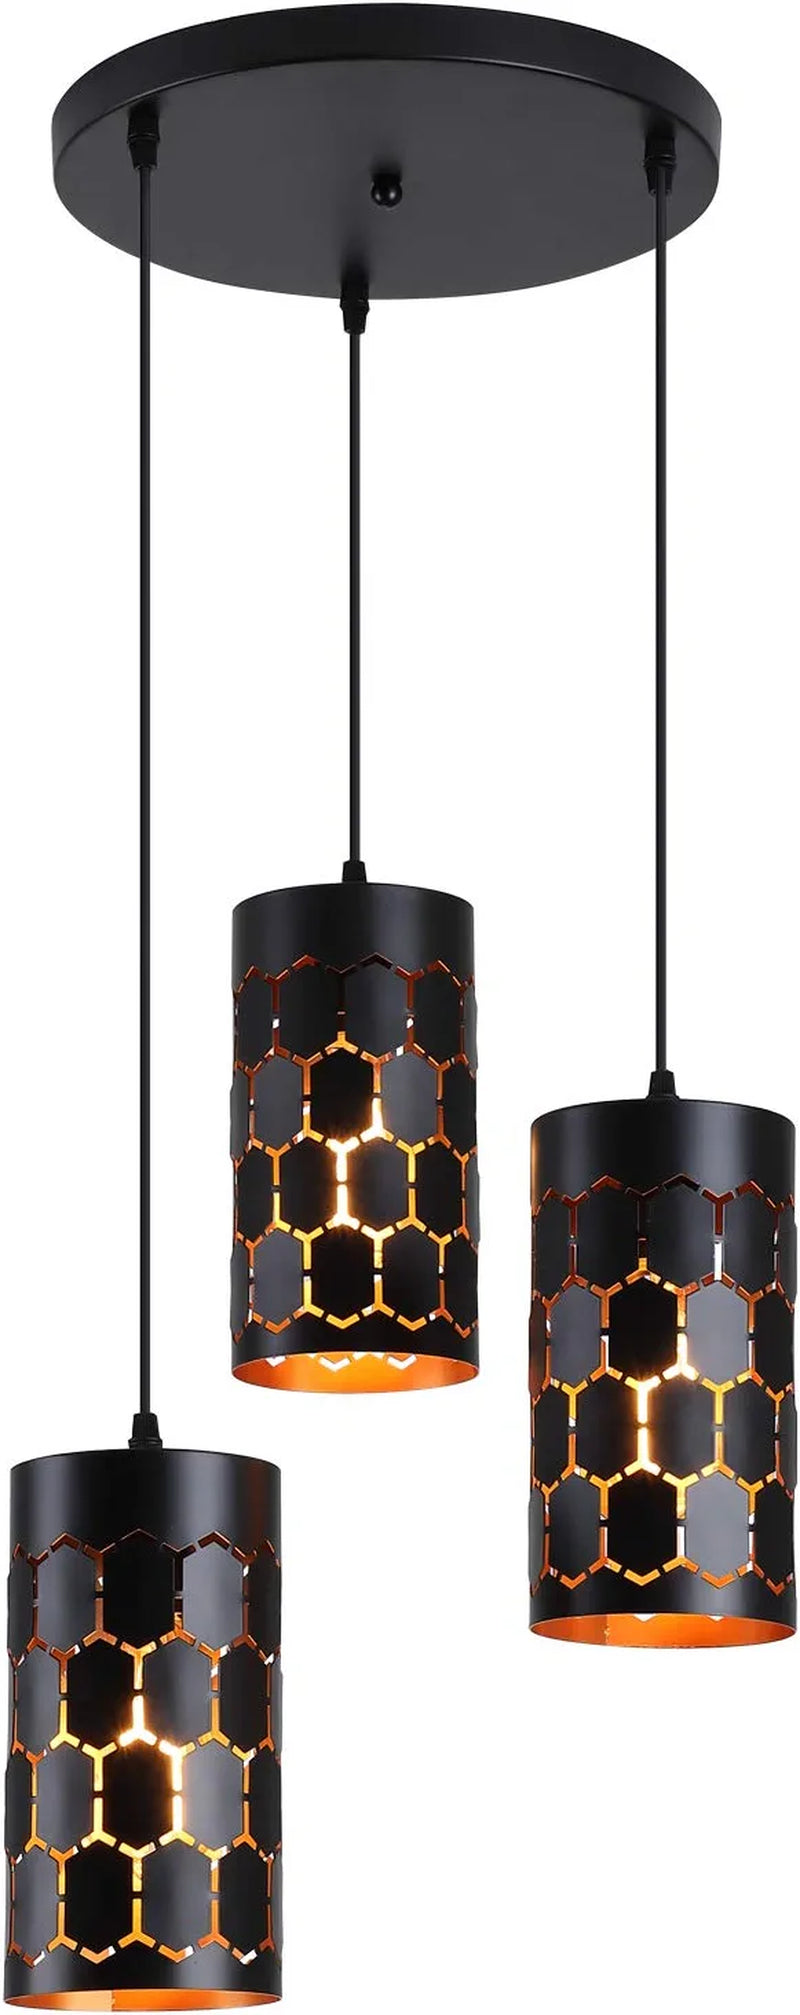 Contemporary Pendant Light with Cylindrical Metal Cage, One-Light Adjustable Industrial Mini Pendant Lighting Fixture for Kitchen Island Cafe Bar, Gold Inner and Black Finish